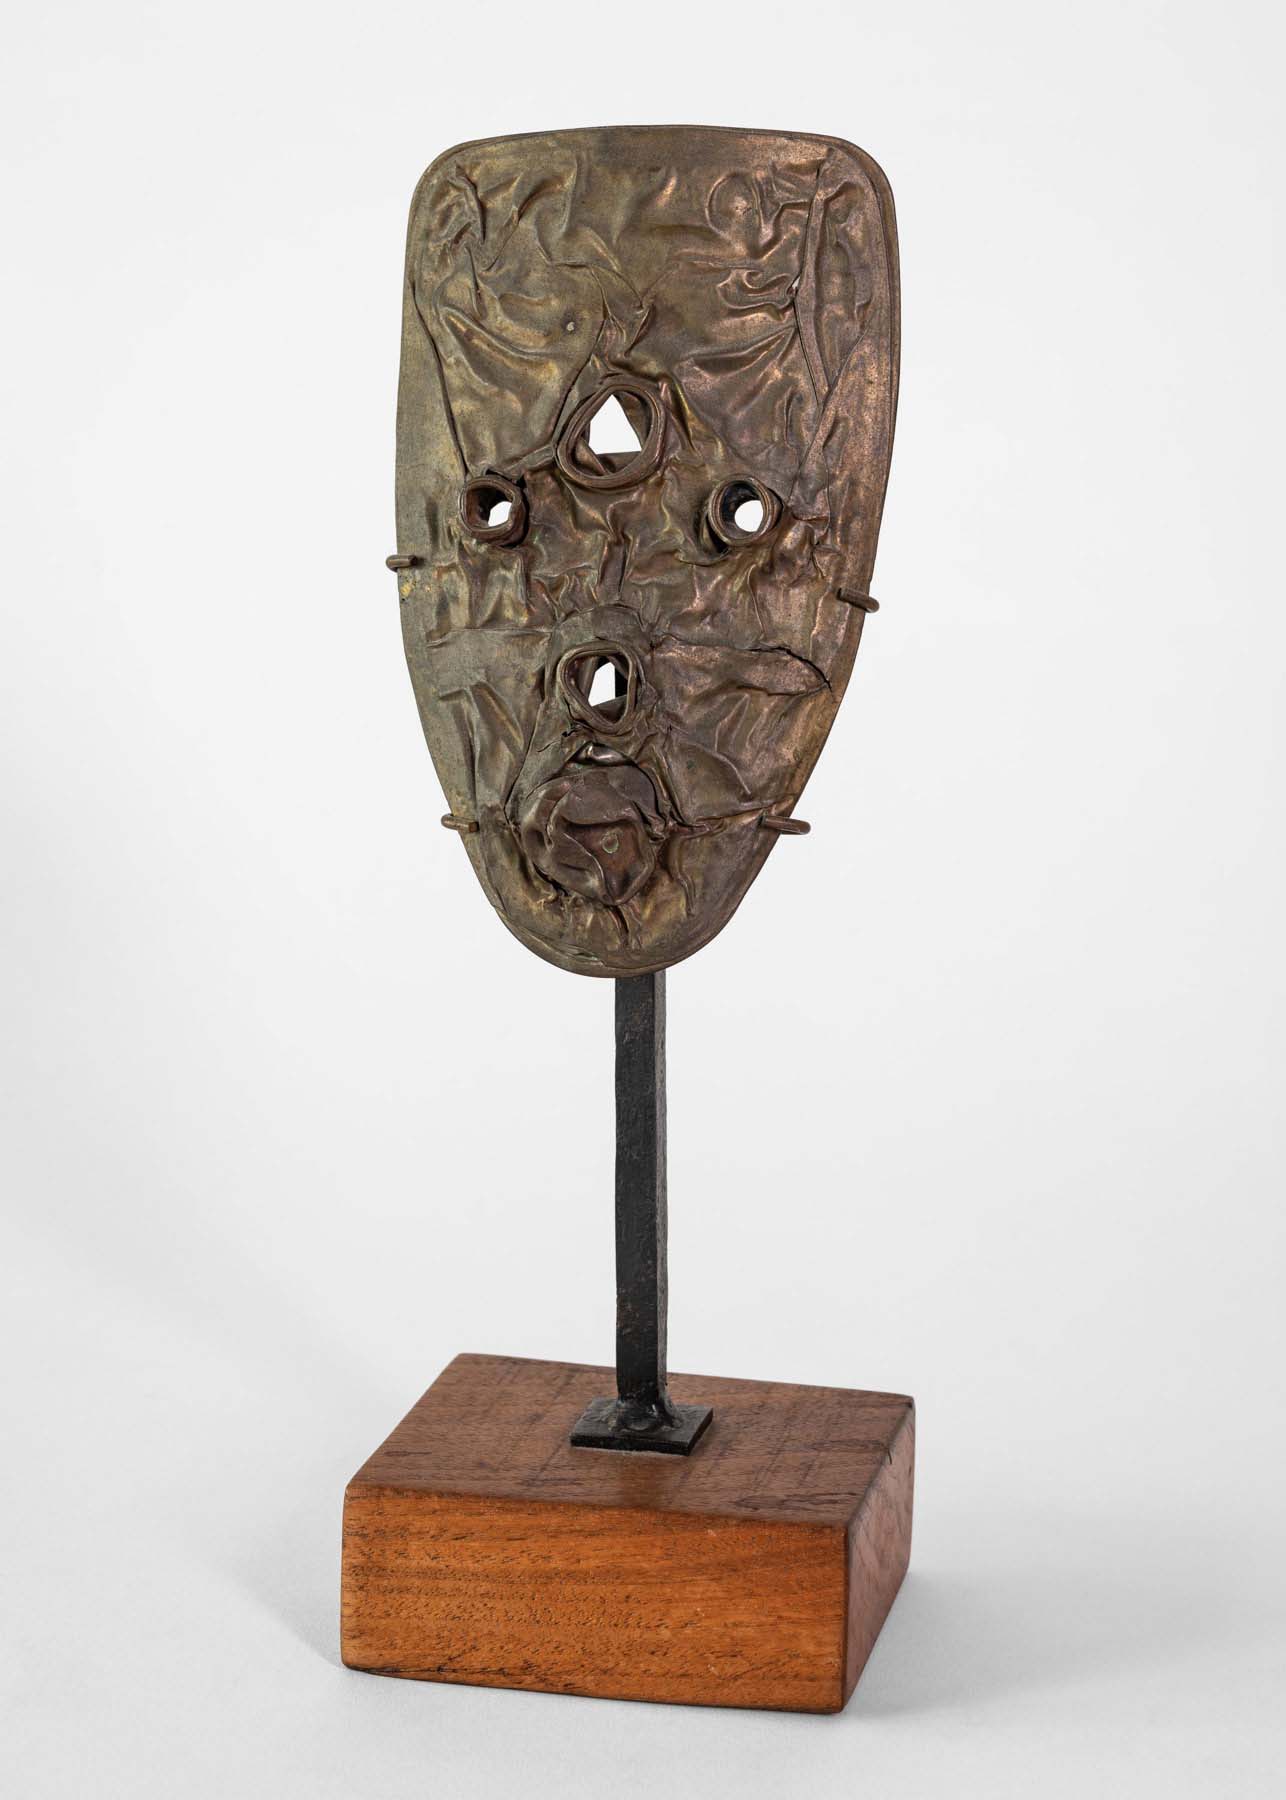 Abstract sculpture of a mask.